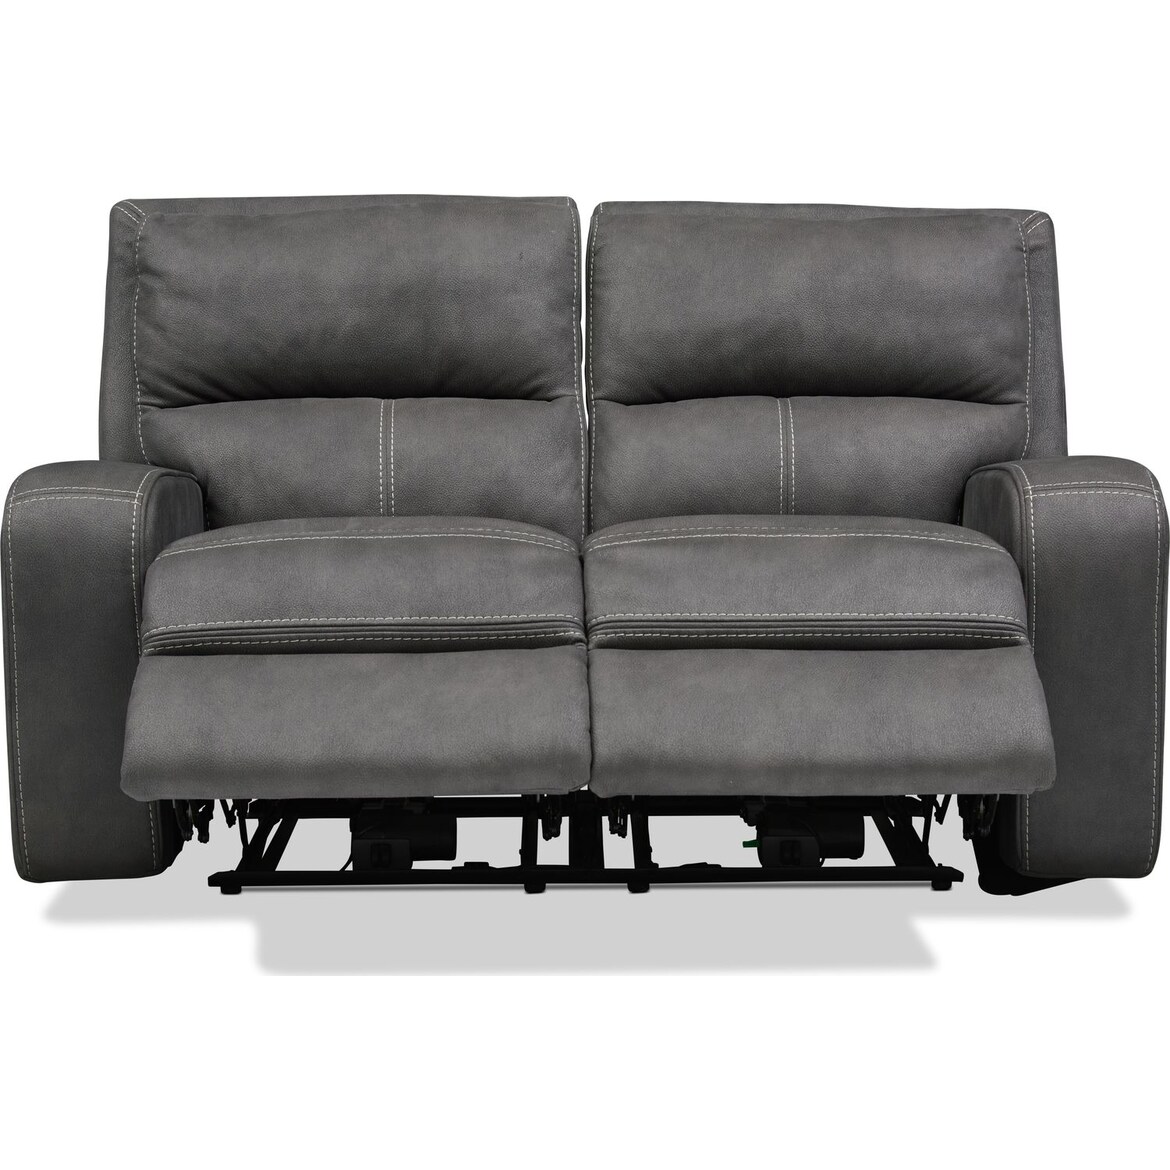 Burke Dual-Power Reclining Loveseat - Charcoal | Value City Furniture